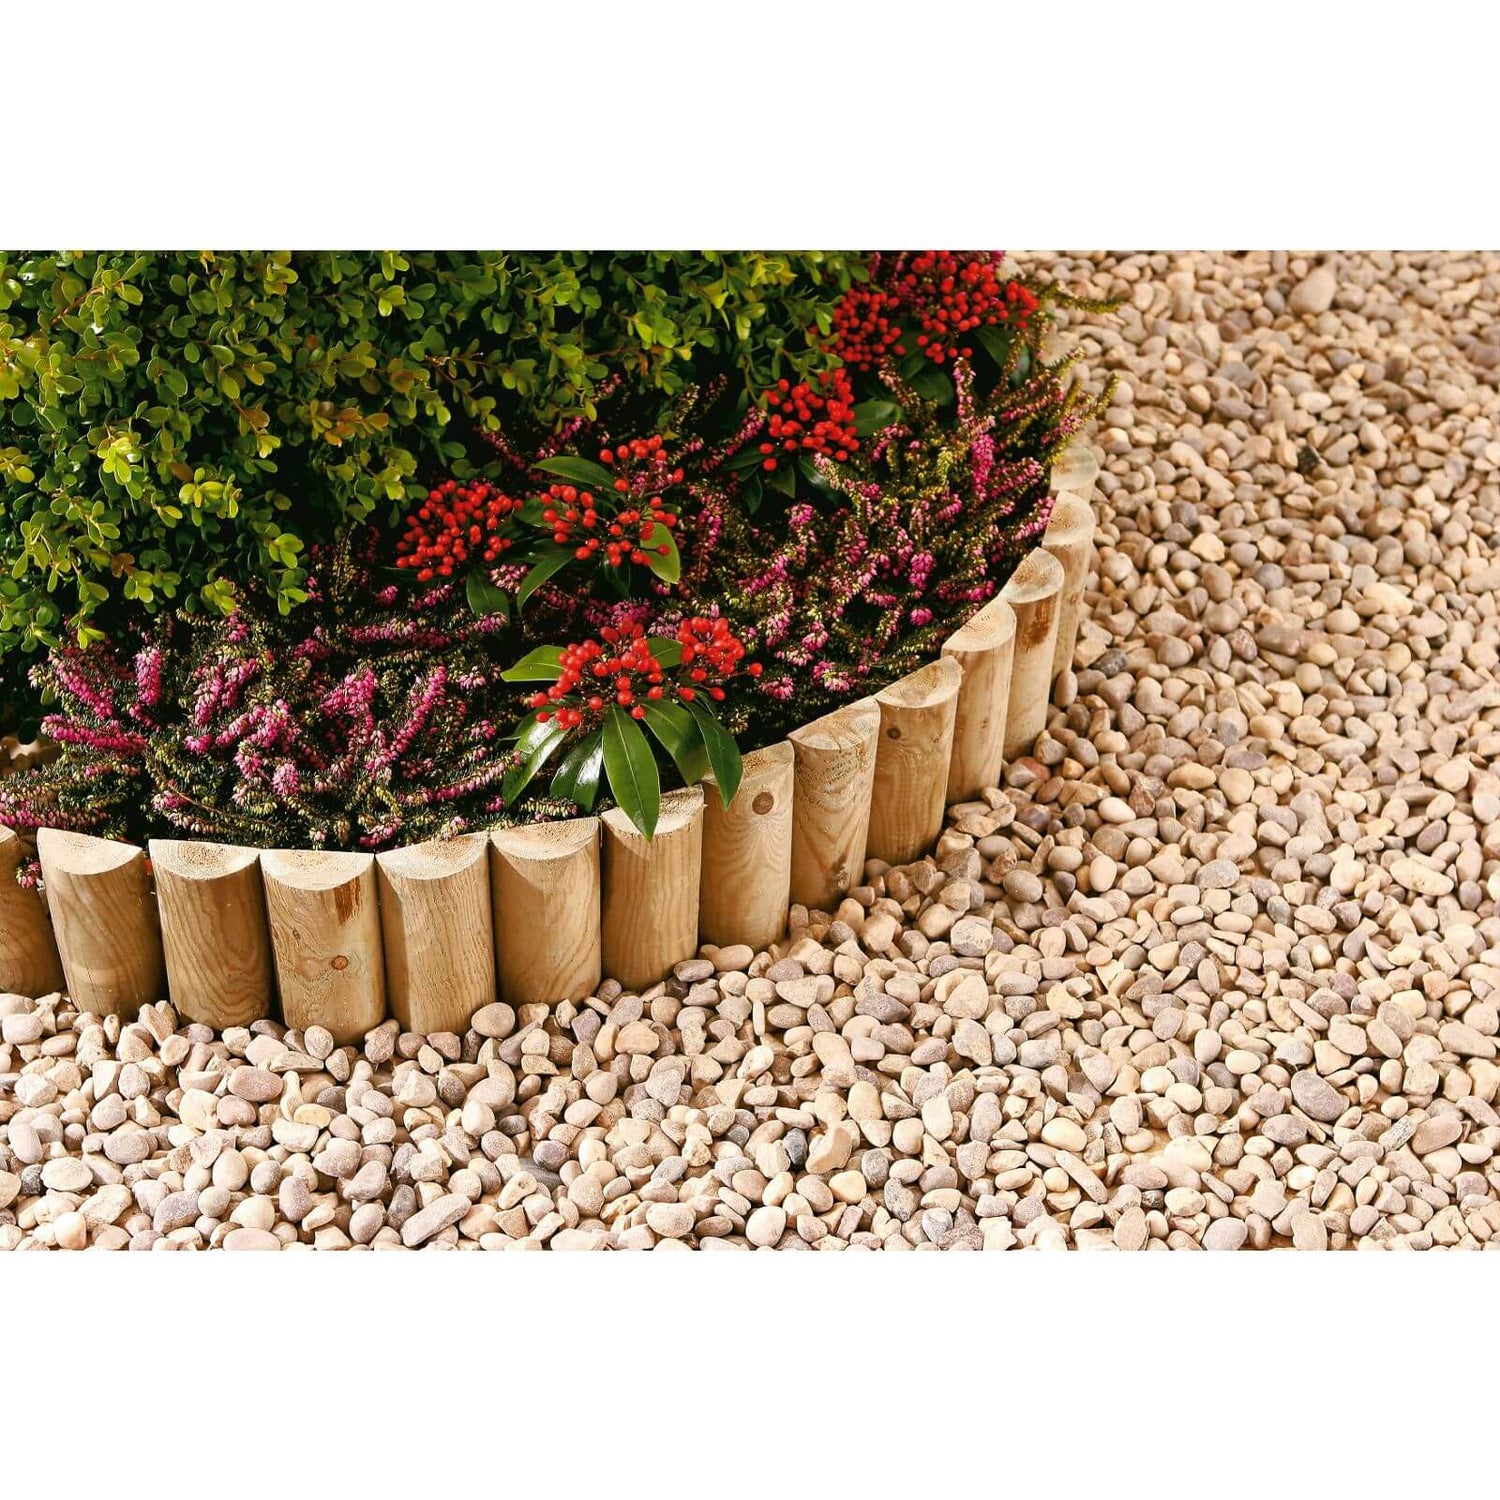 Softwood Edging Border Roll